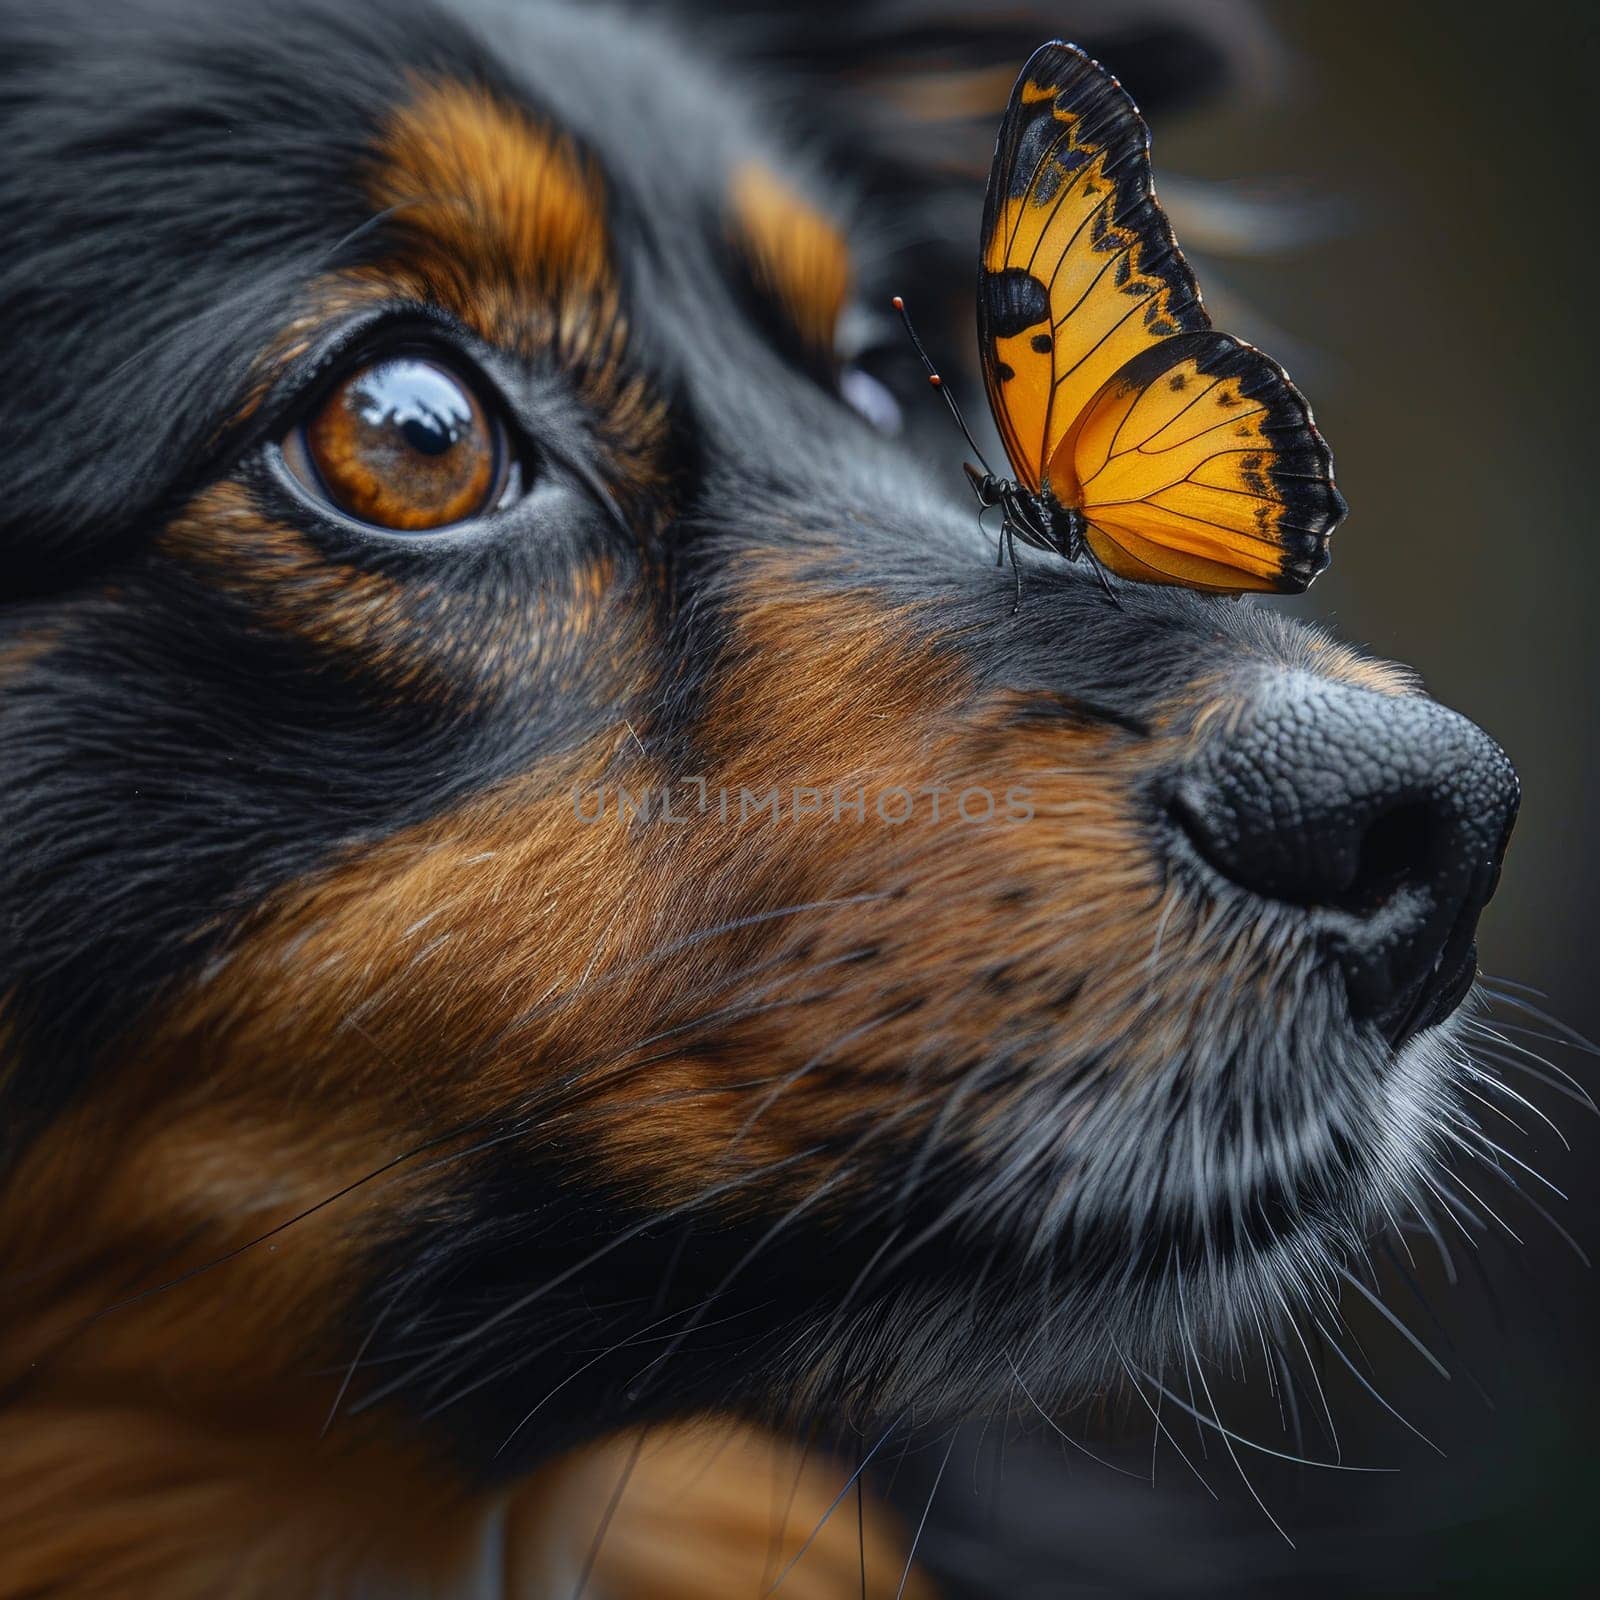 A butterfly rests on the snout of a watchful dog, their eyes reflecting an understanding beyond words. The contrast of wild wing patterns and domestic calm tells a deeper story.. by sfinks